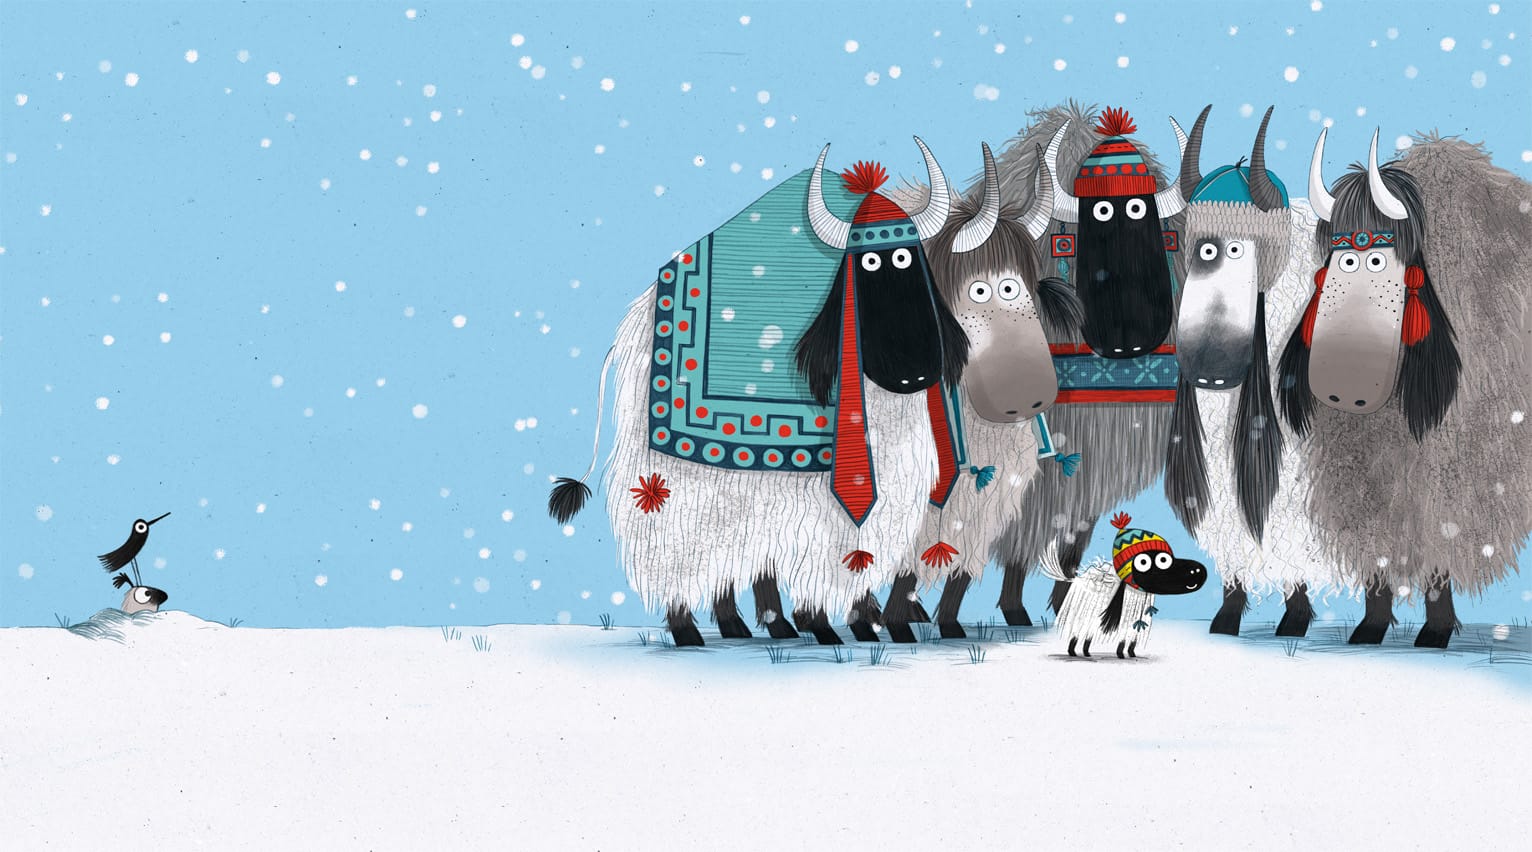 An illustration of characters from The Littlest Yak; five yaks in woolly hats surround their small friend, the littlest Yak.